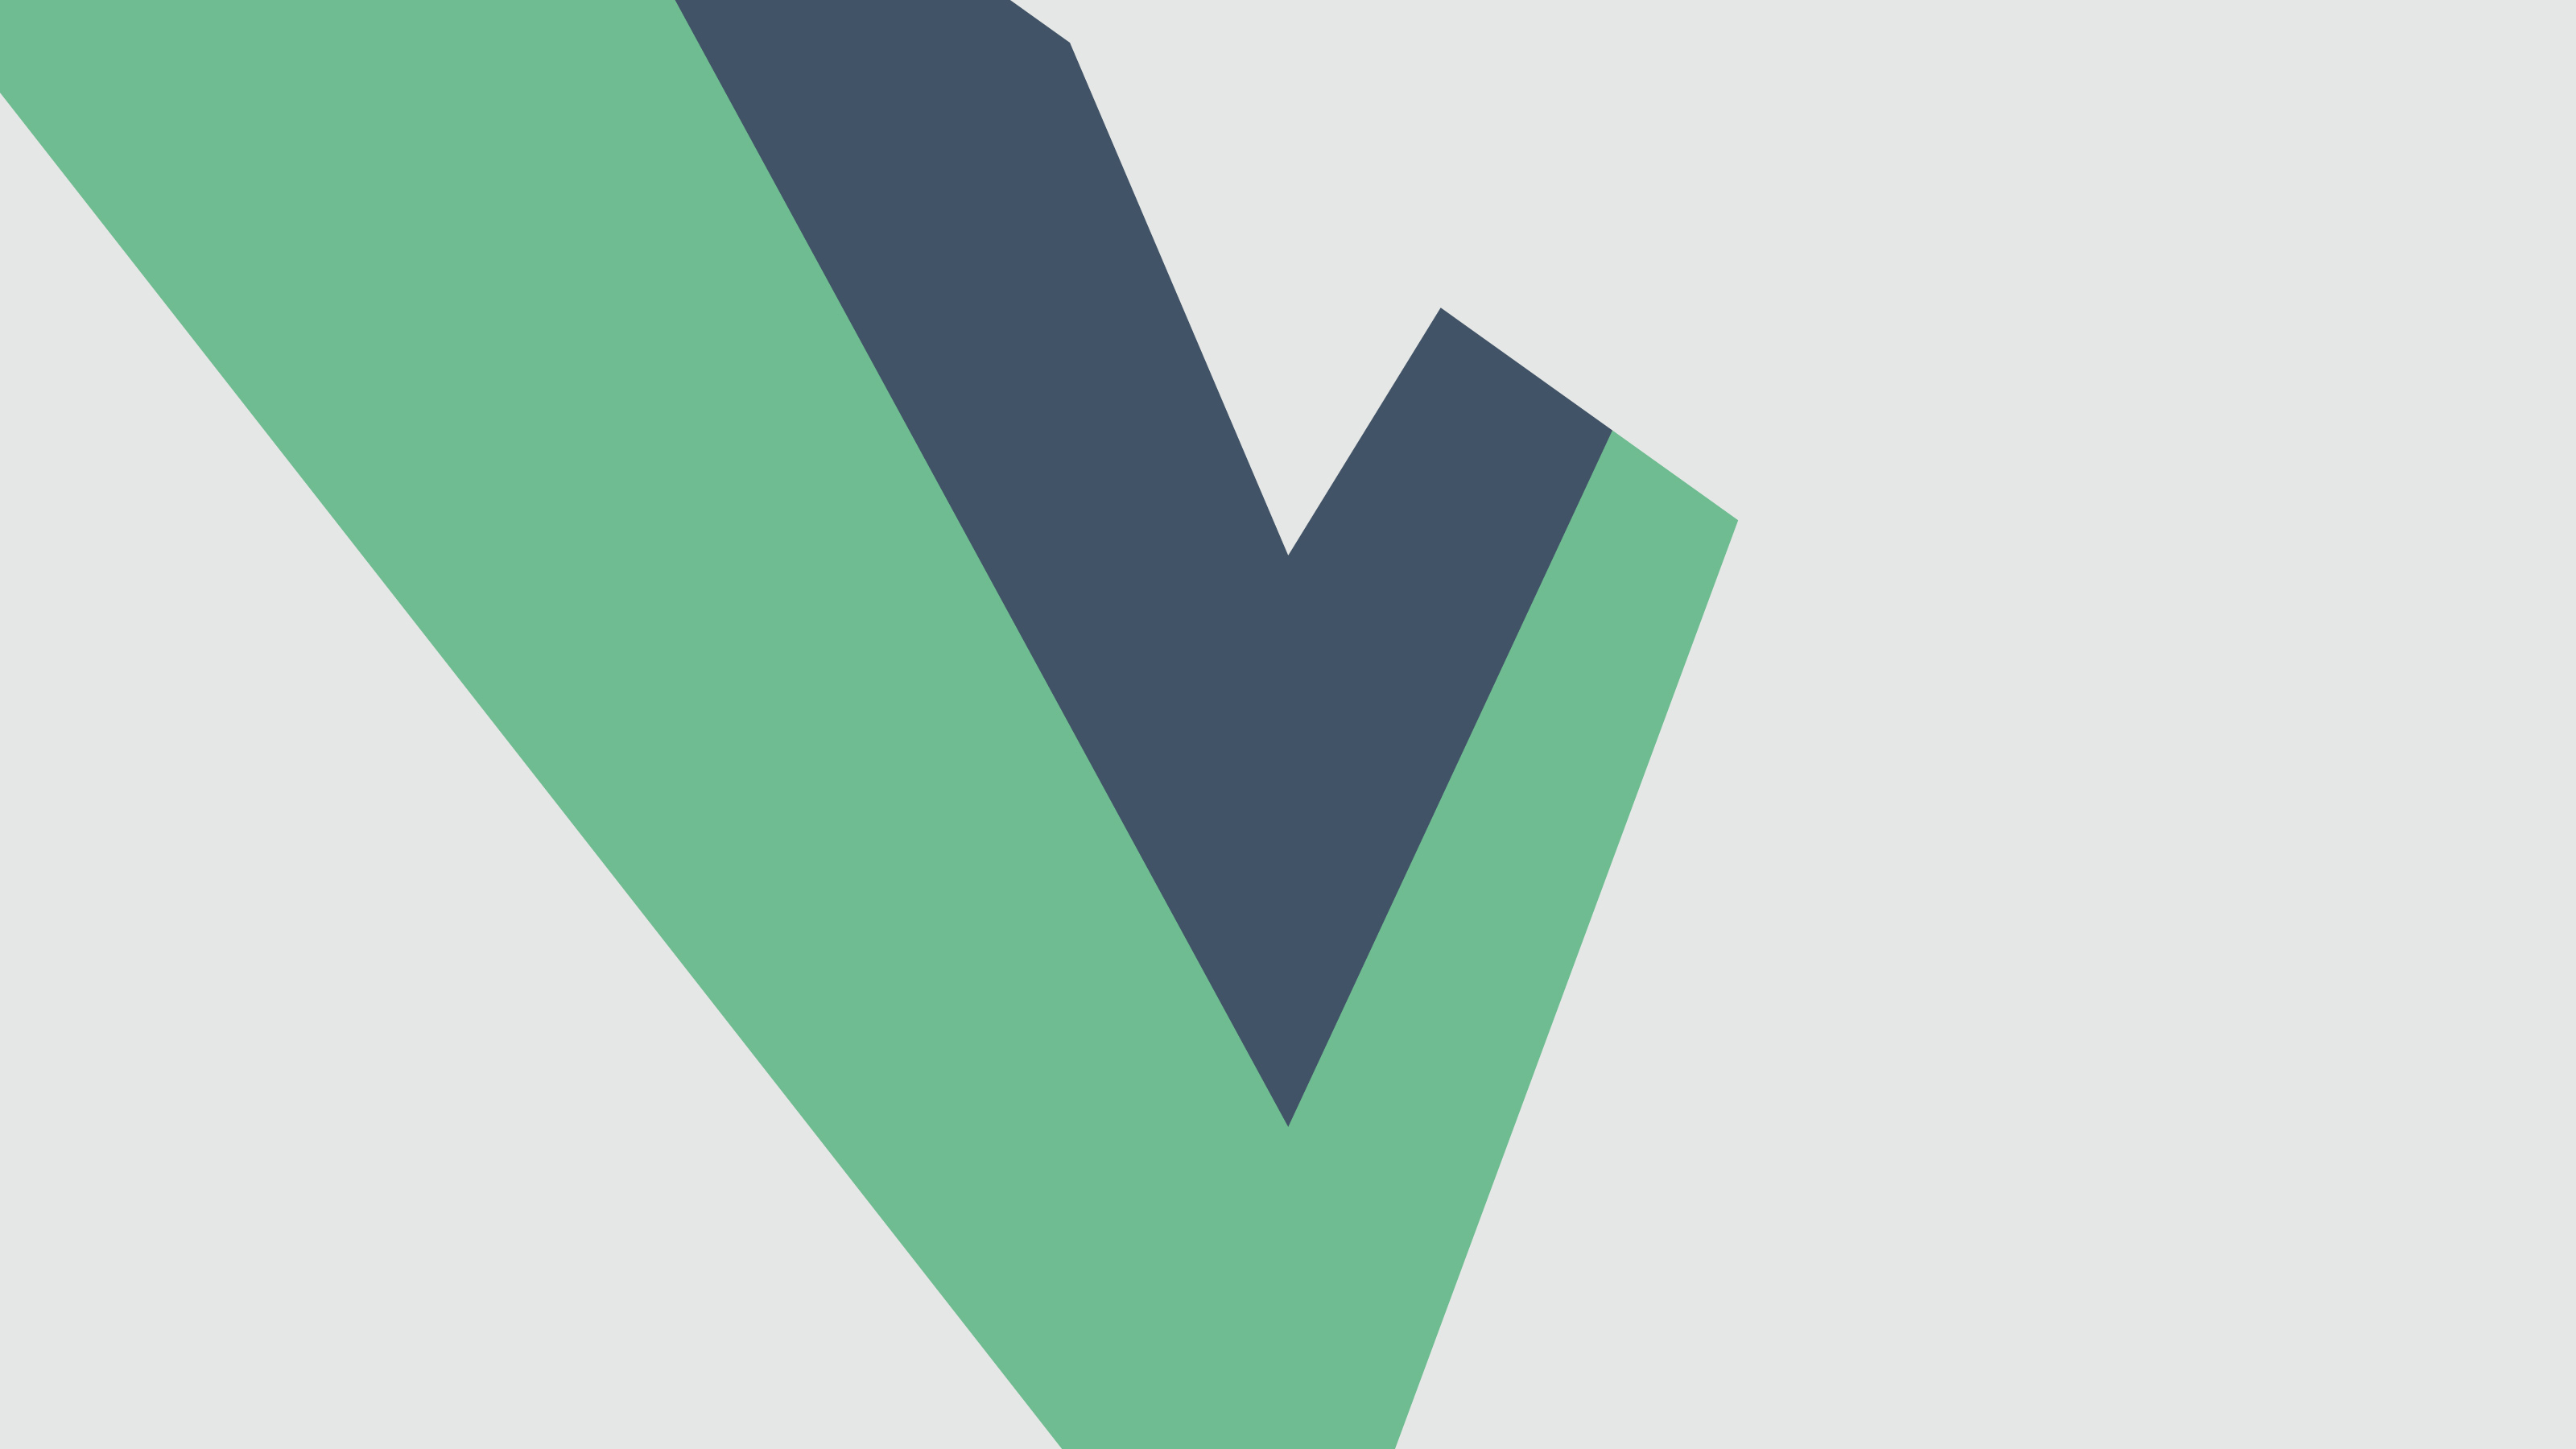 A report and select presentations from Vue.js Amsterdam 2019